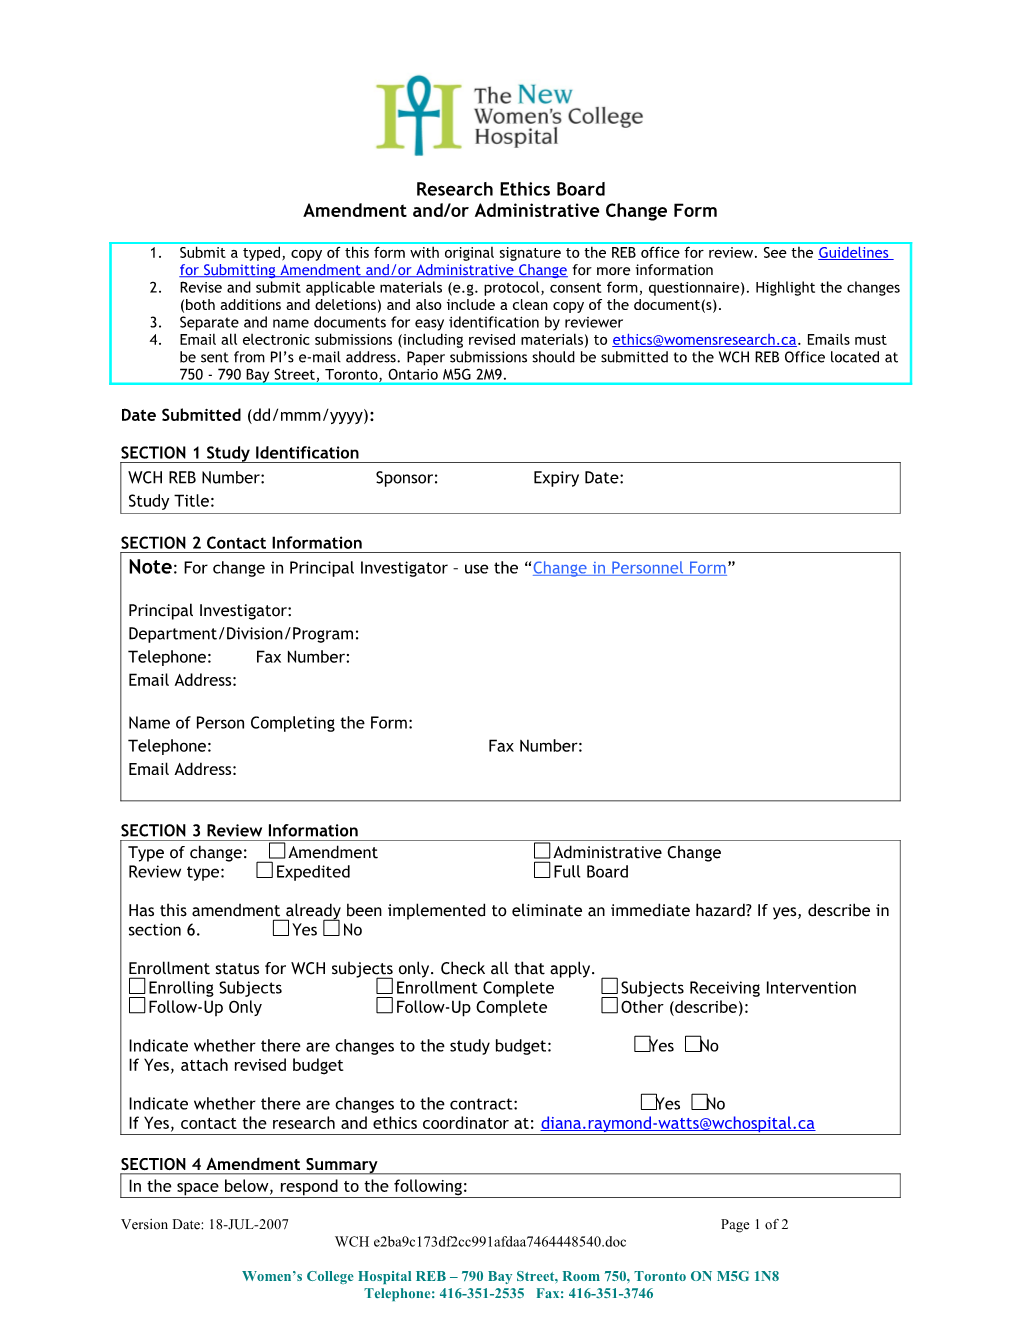 Amendment And/Or Administrative Change Form